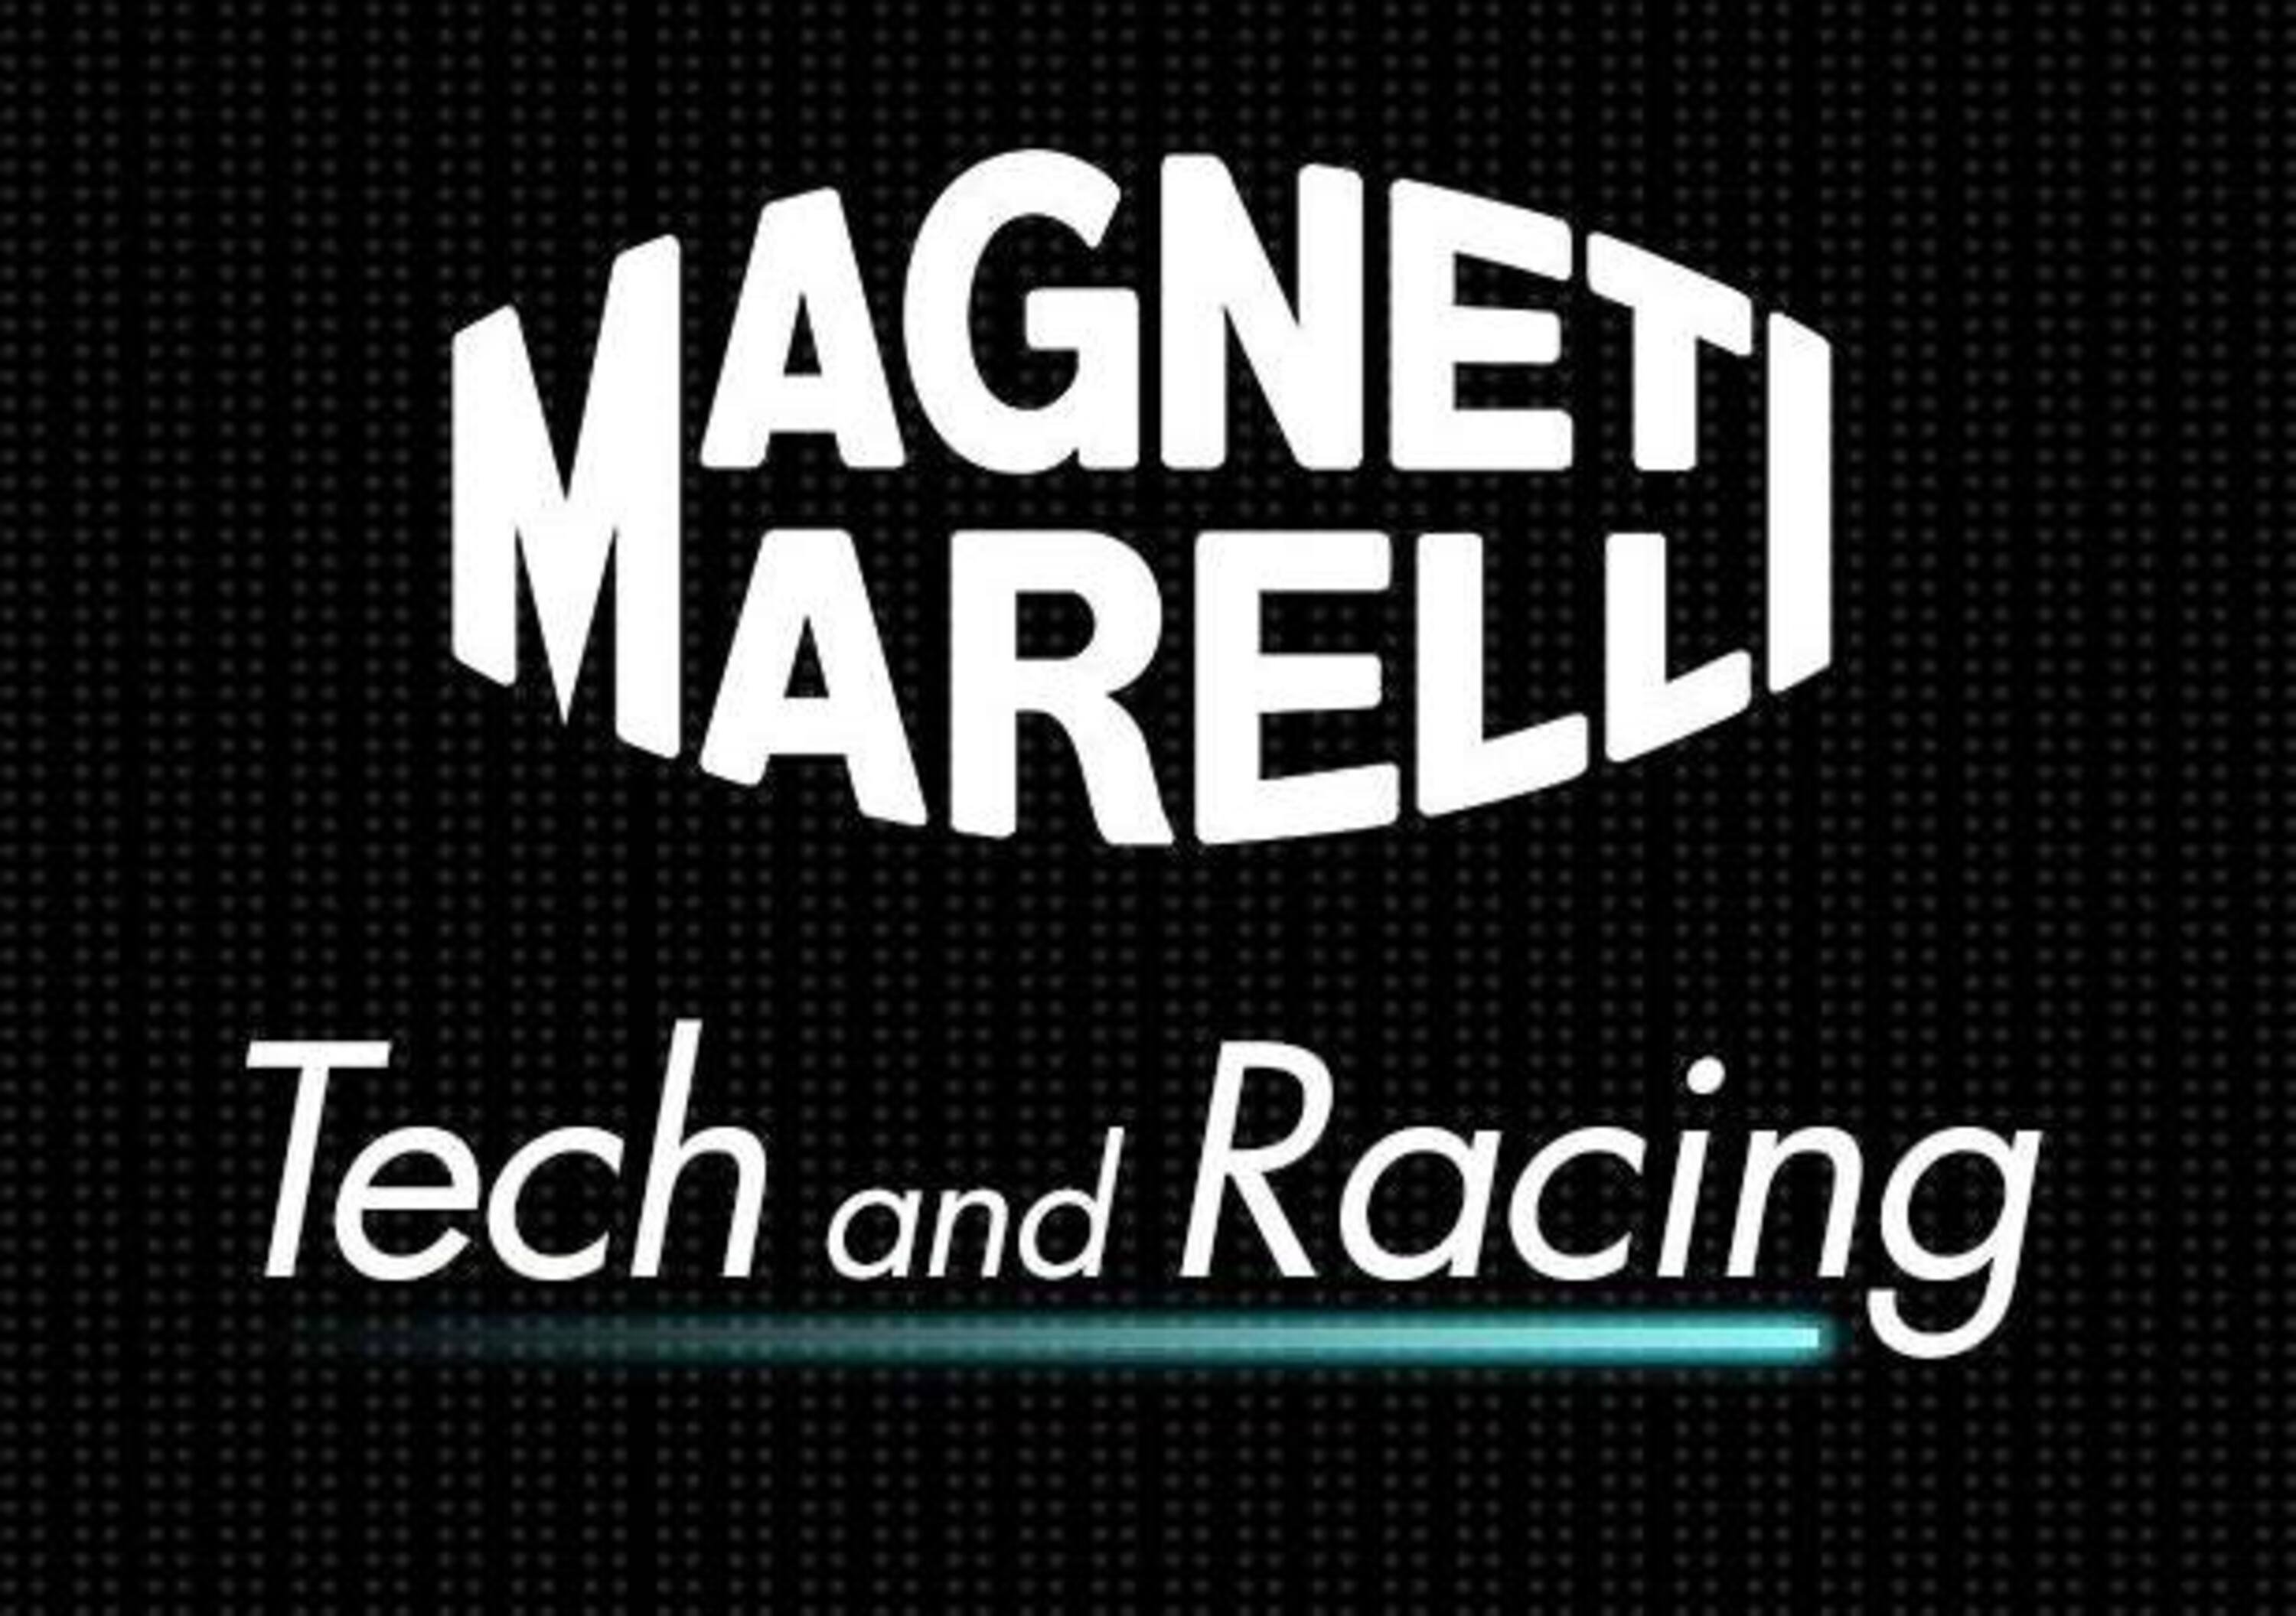 Gruppo FCA: bye-bye Magneti Marelli, welcome Dividendo extra